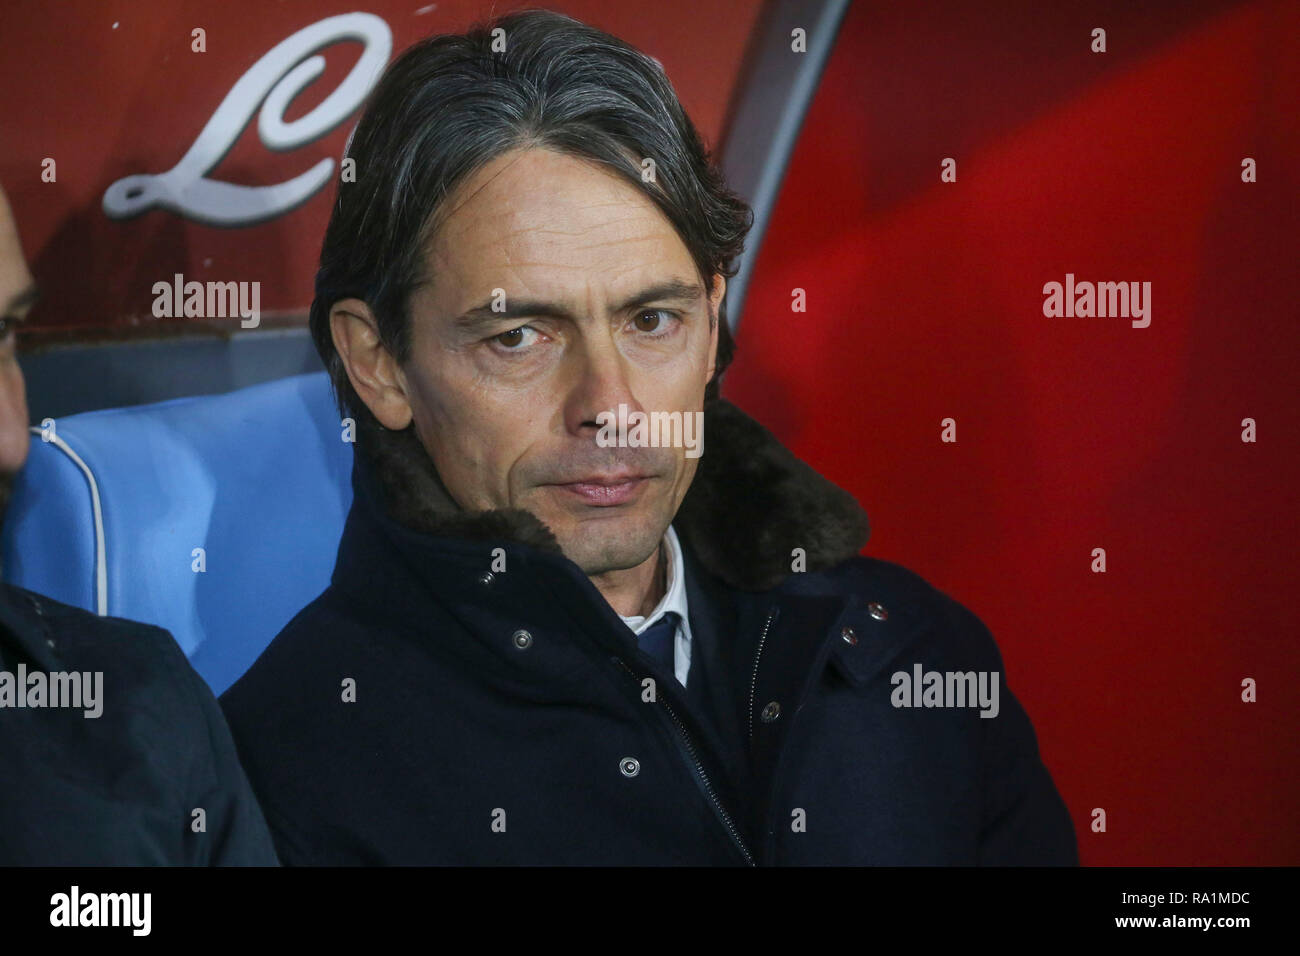 Napoli, Campania, Italy, 29-12-18, Serie A football match SSC Napoli - Bologna at the San Paolo Stadium in picture Filippo Inzaghi coach of the Bologn Stock Photo